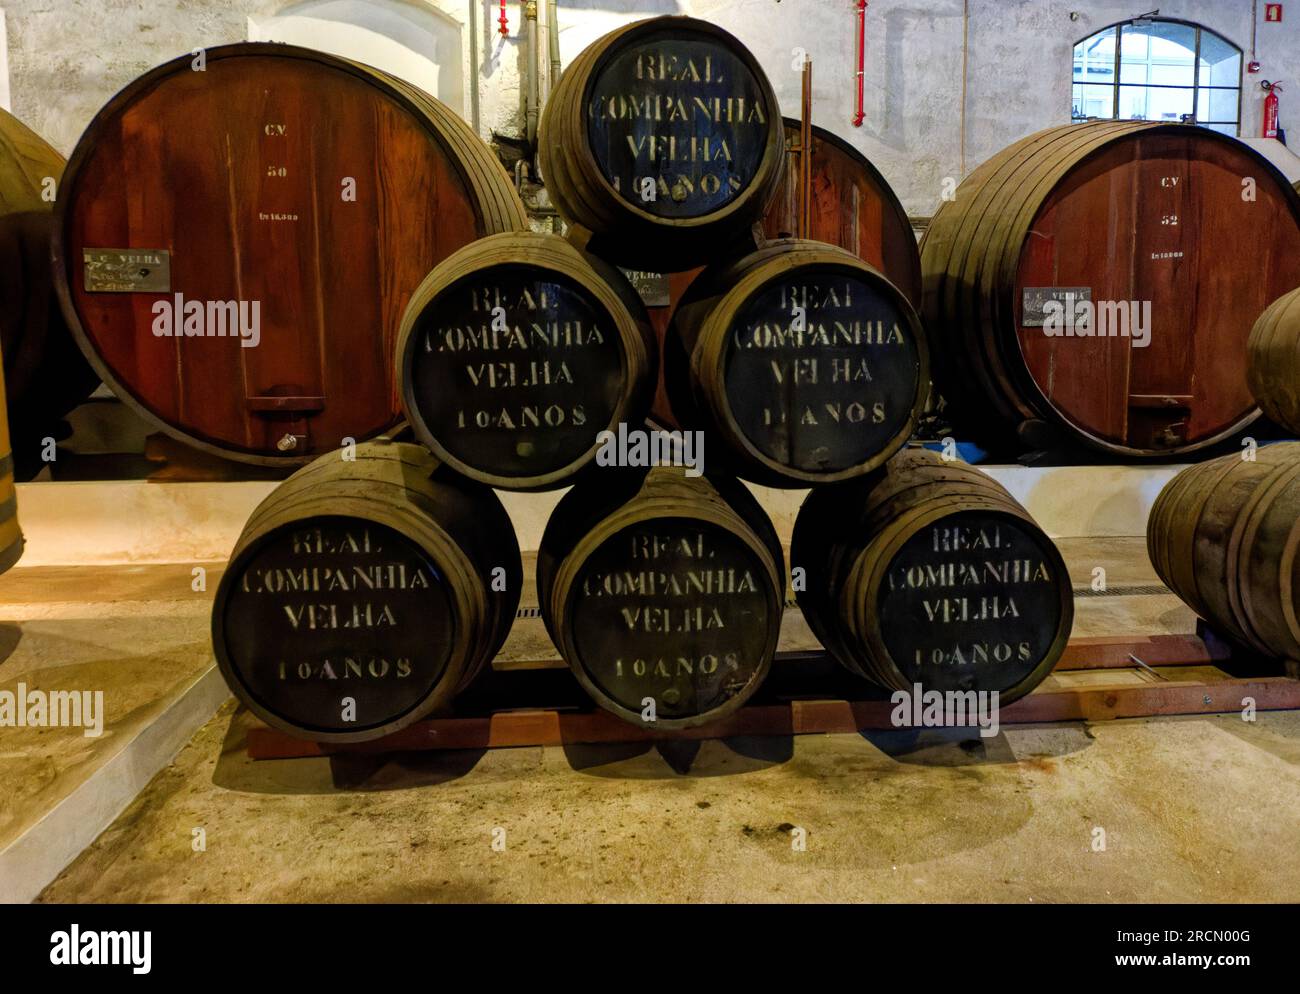 Real Companhia Velha, casks of 10 year old port in their cellar, Porto, Portugal. Stock Photo